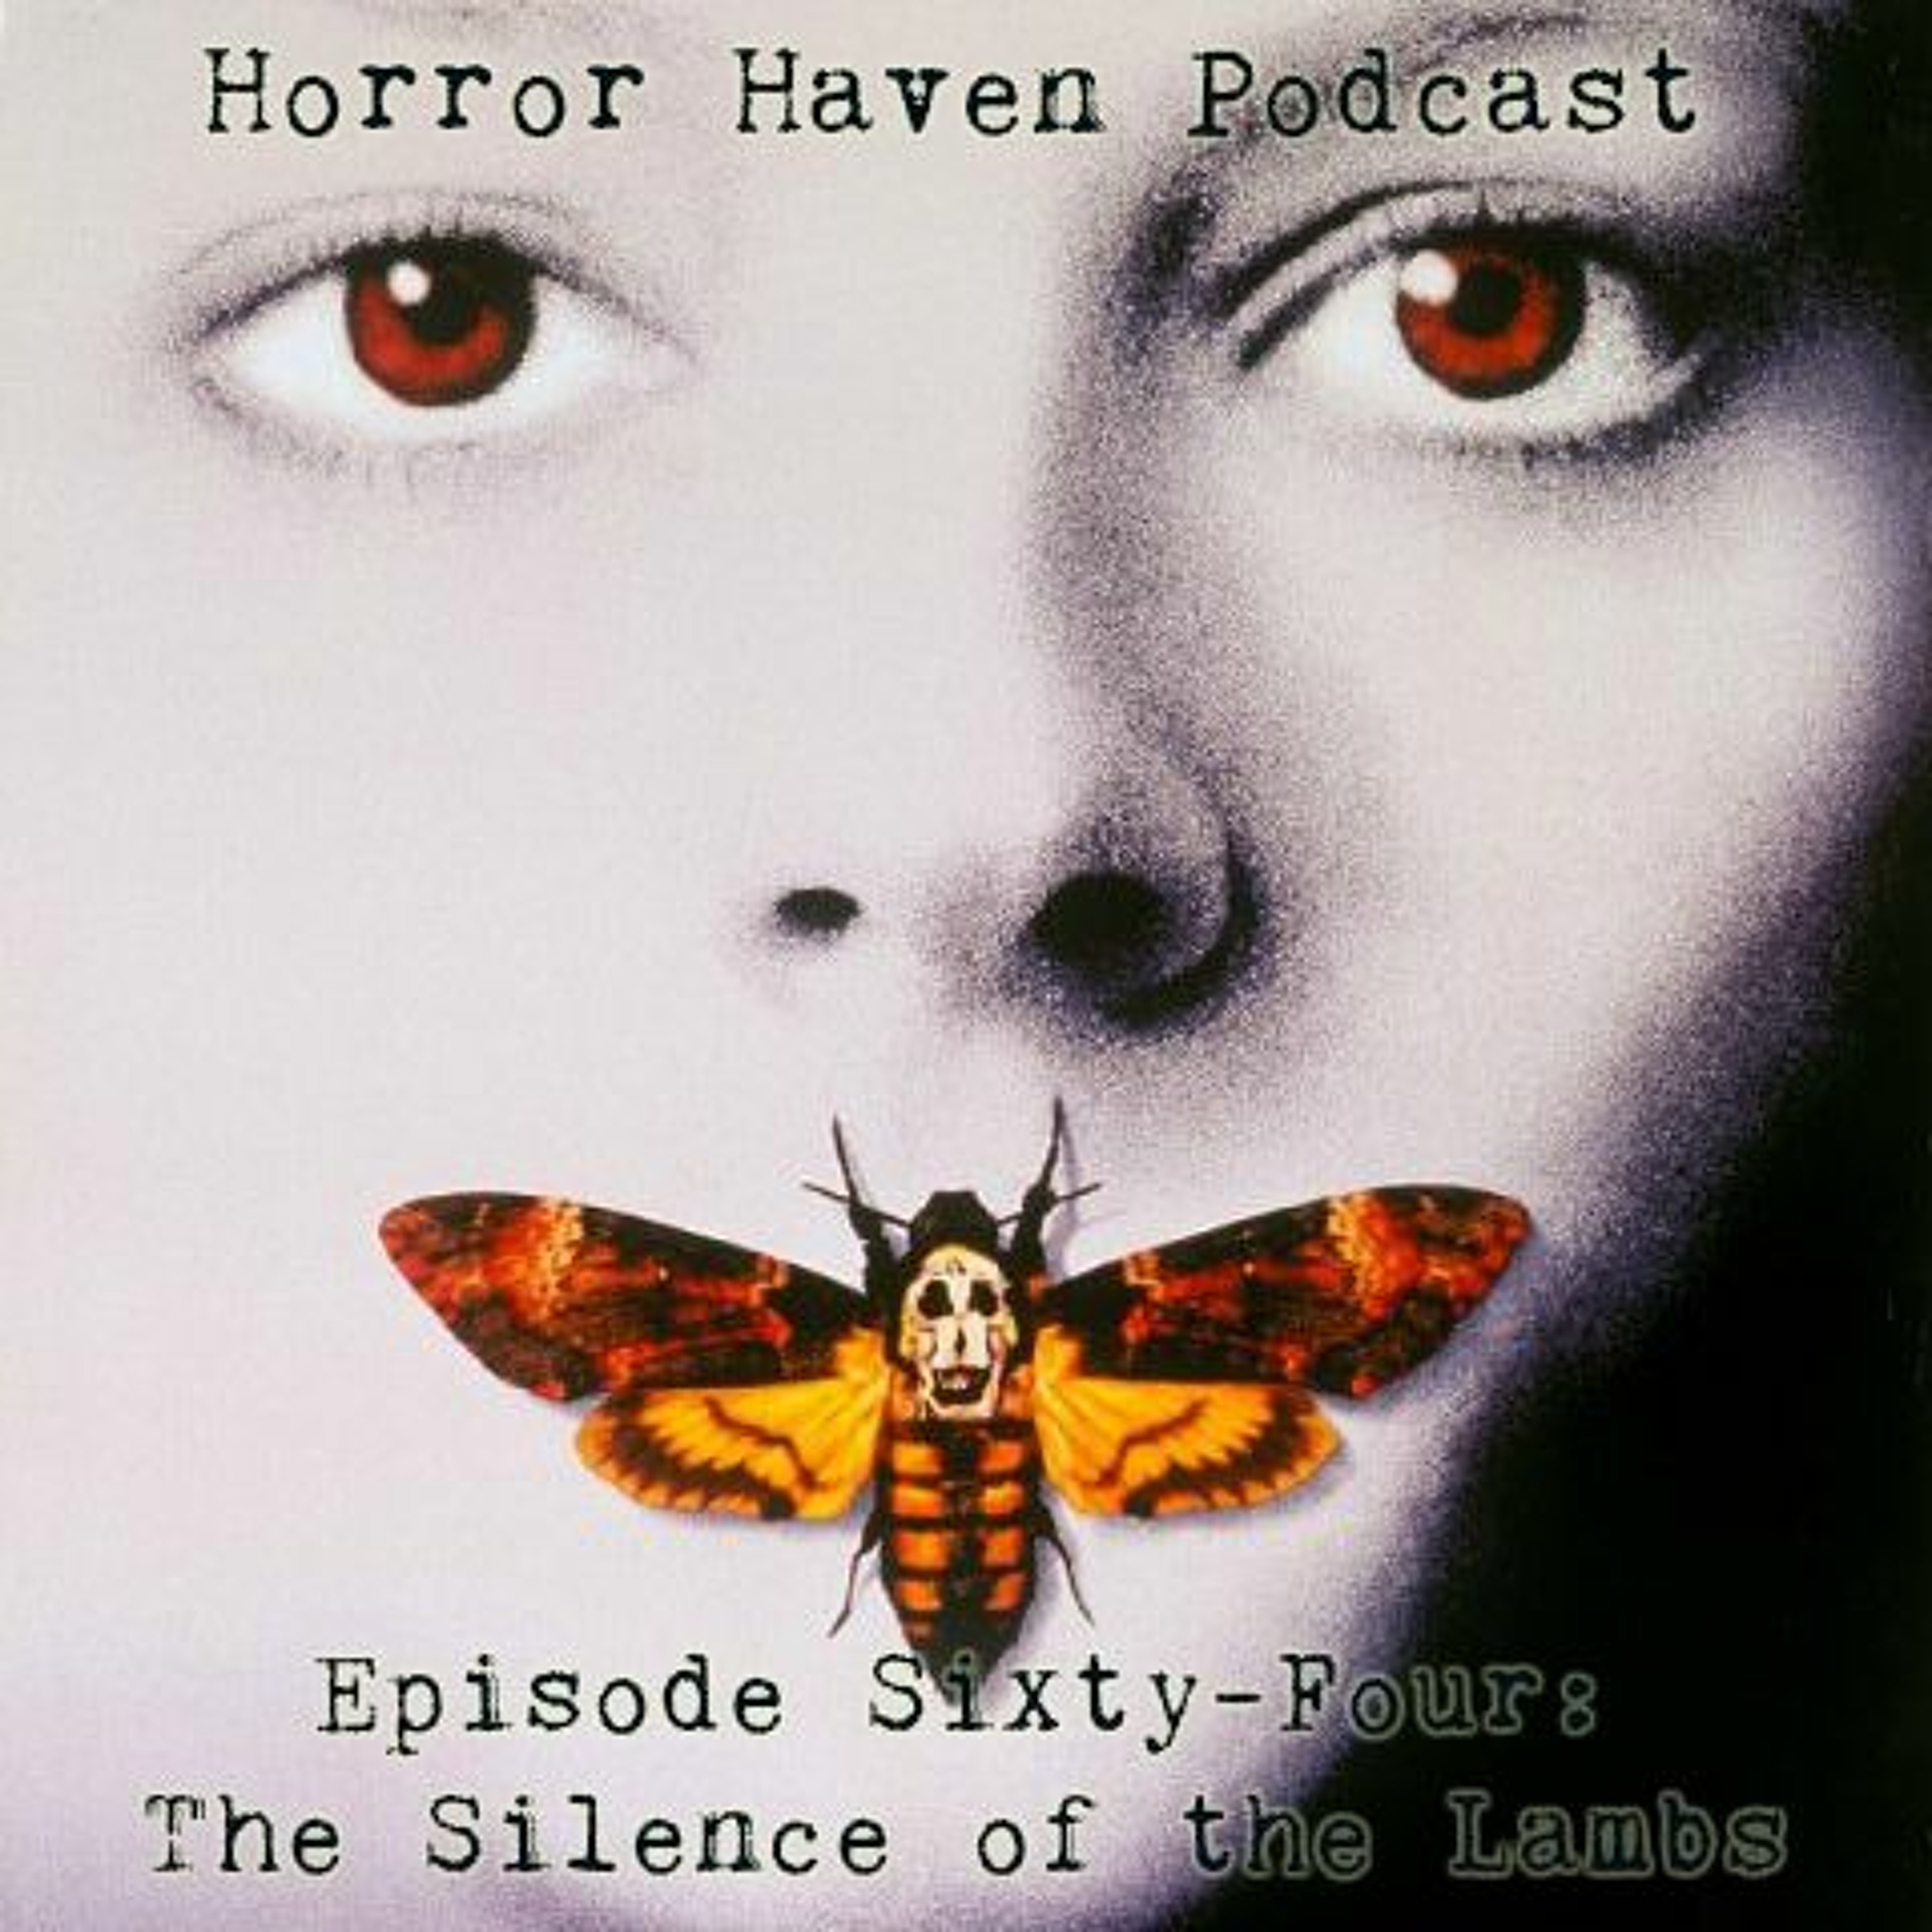 Episode Sixty-Four:  The Silence of the Lambs